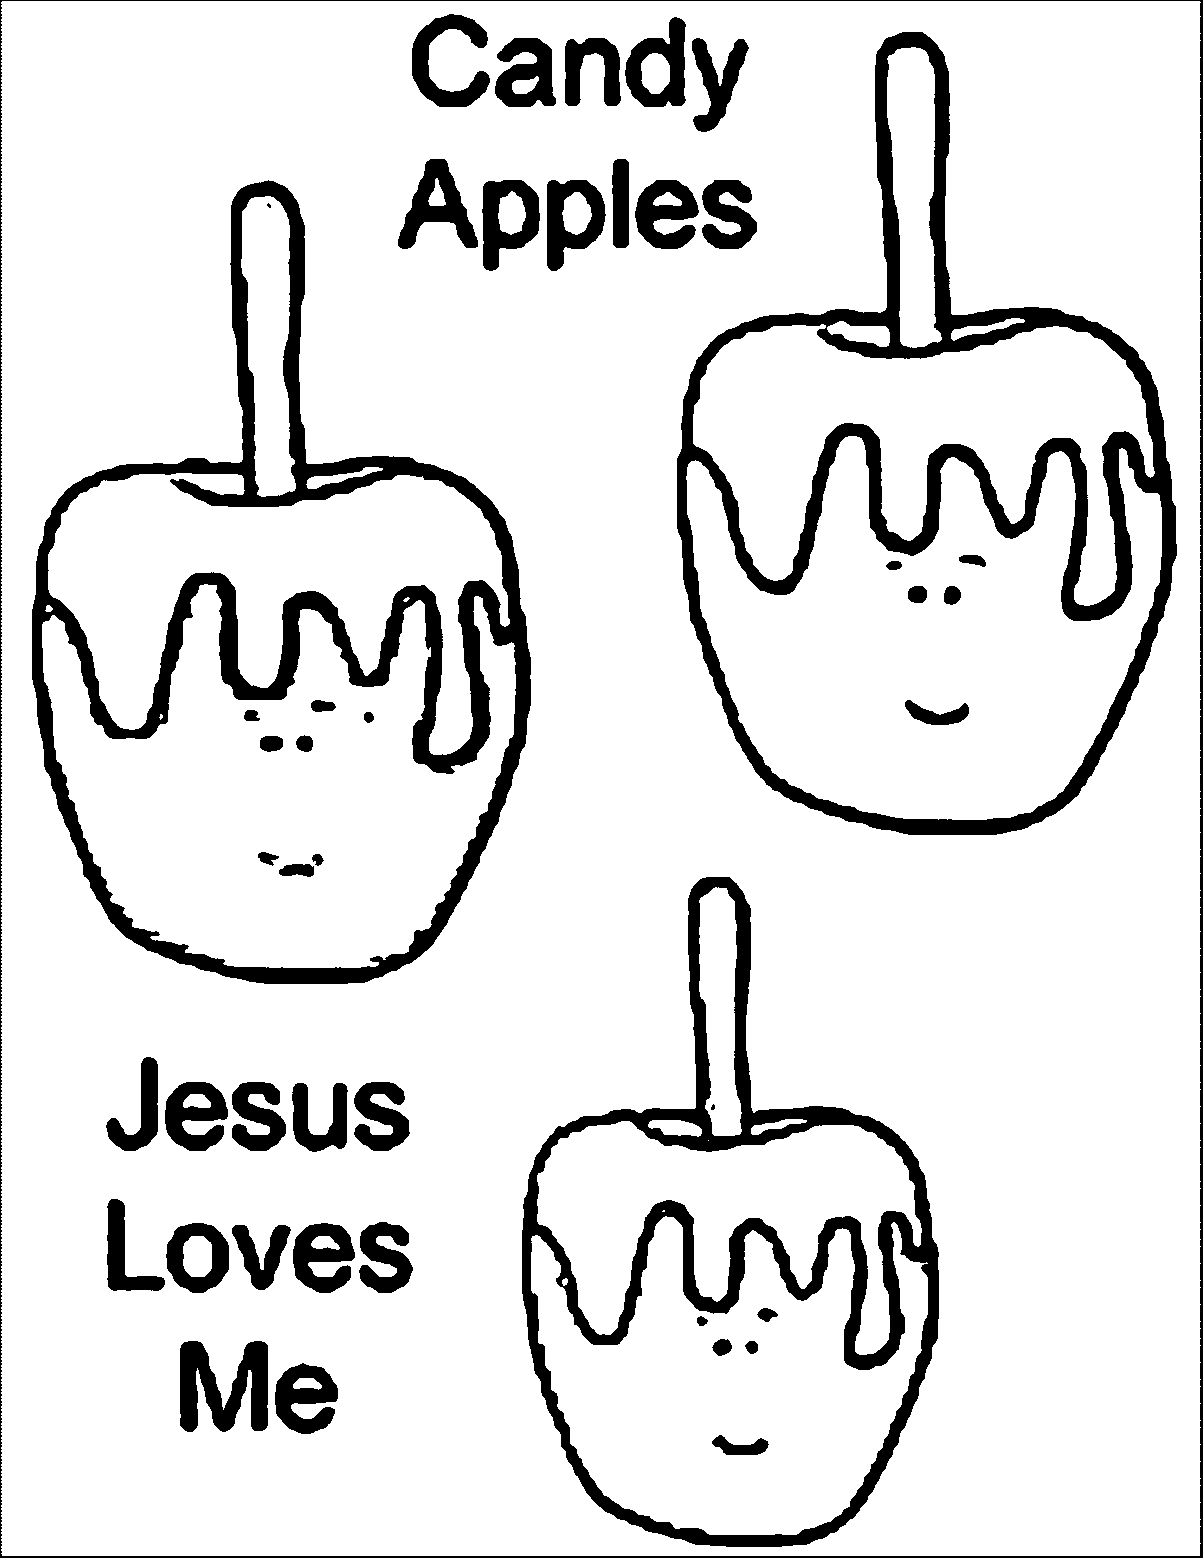 Candy Apples Clipart Jesus Loves Me Coloring Page | Wecoloringpage